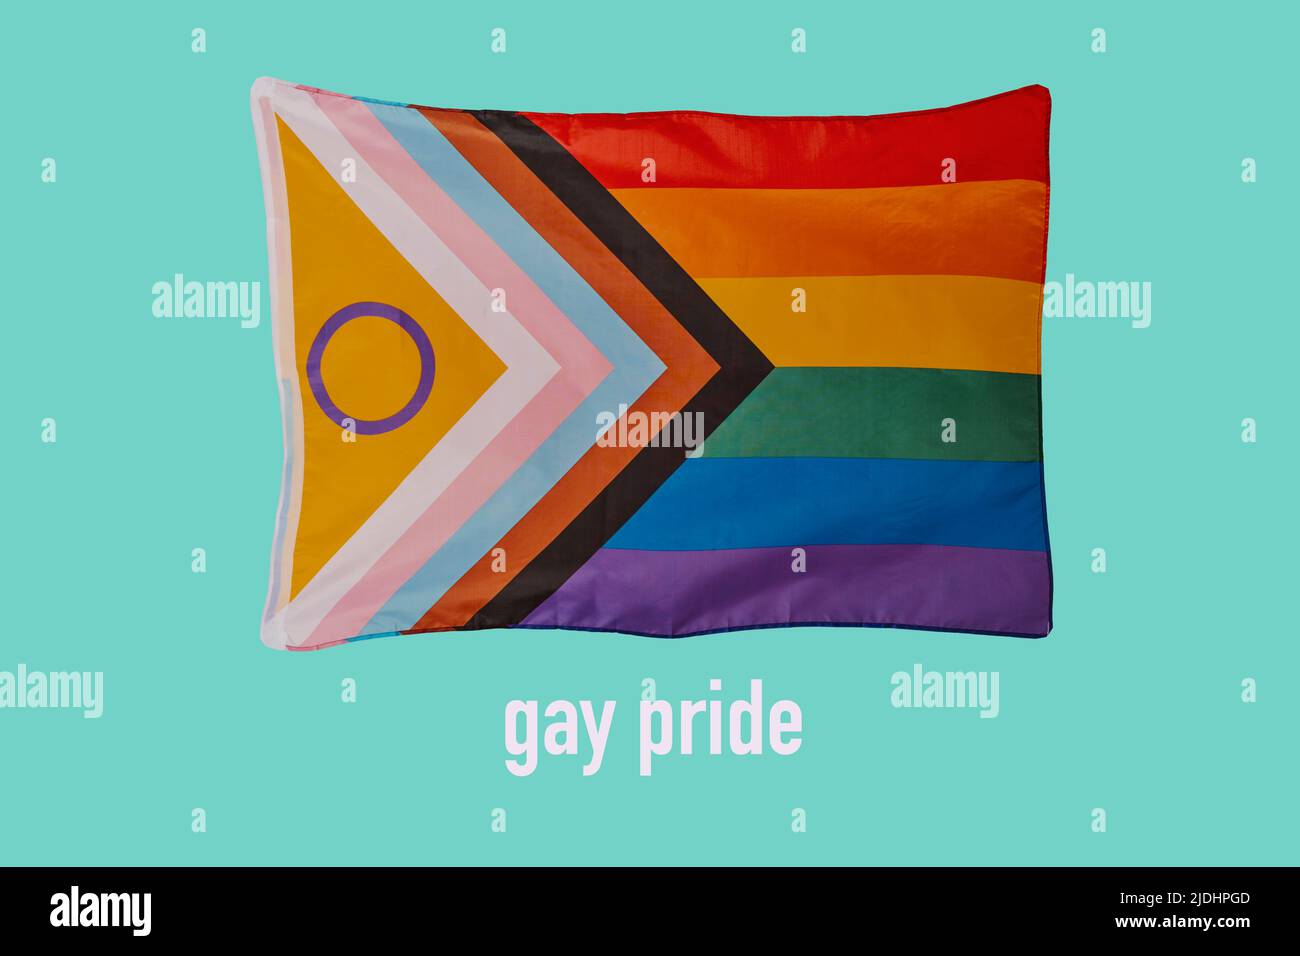 the text gay pride and an intersex-inclusive progress pride flag waving in the air on a greenish blue background Stock Photo